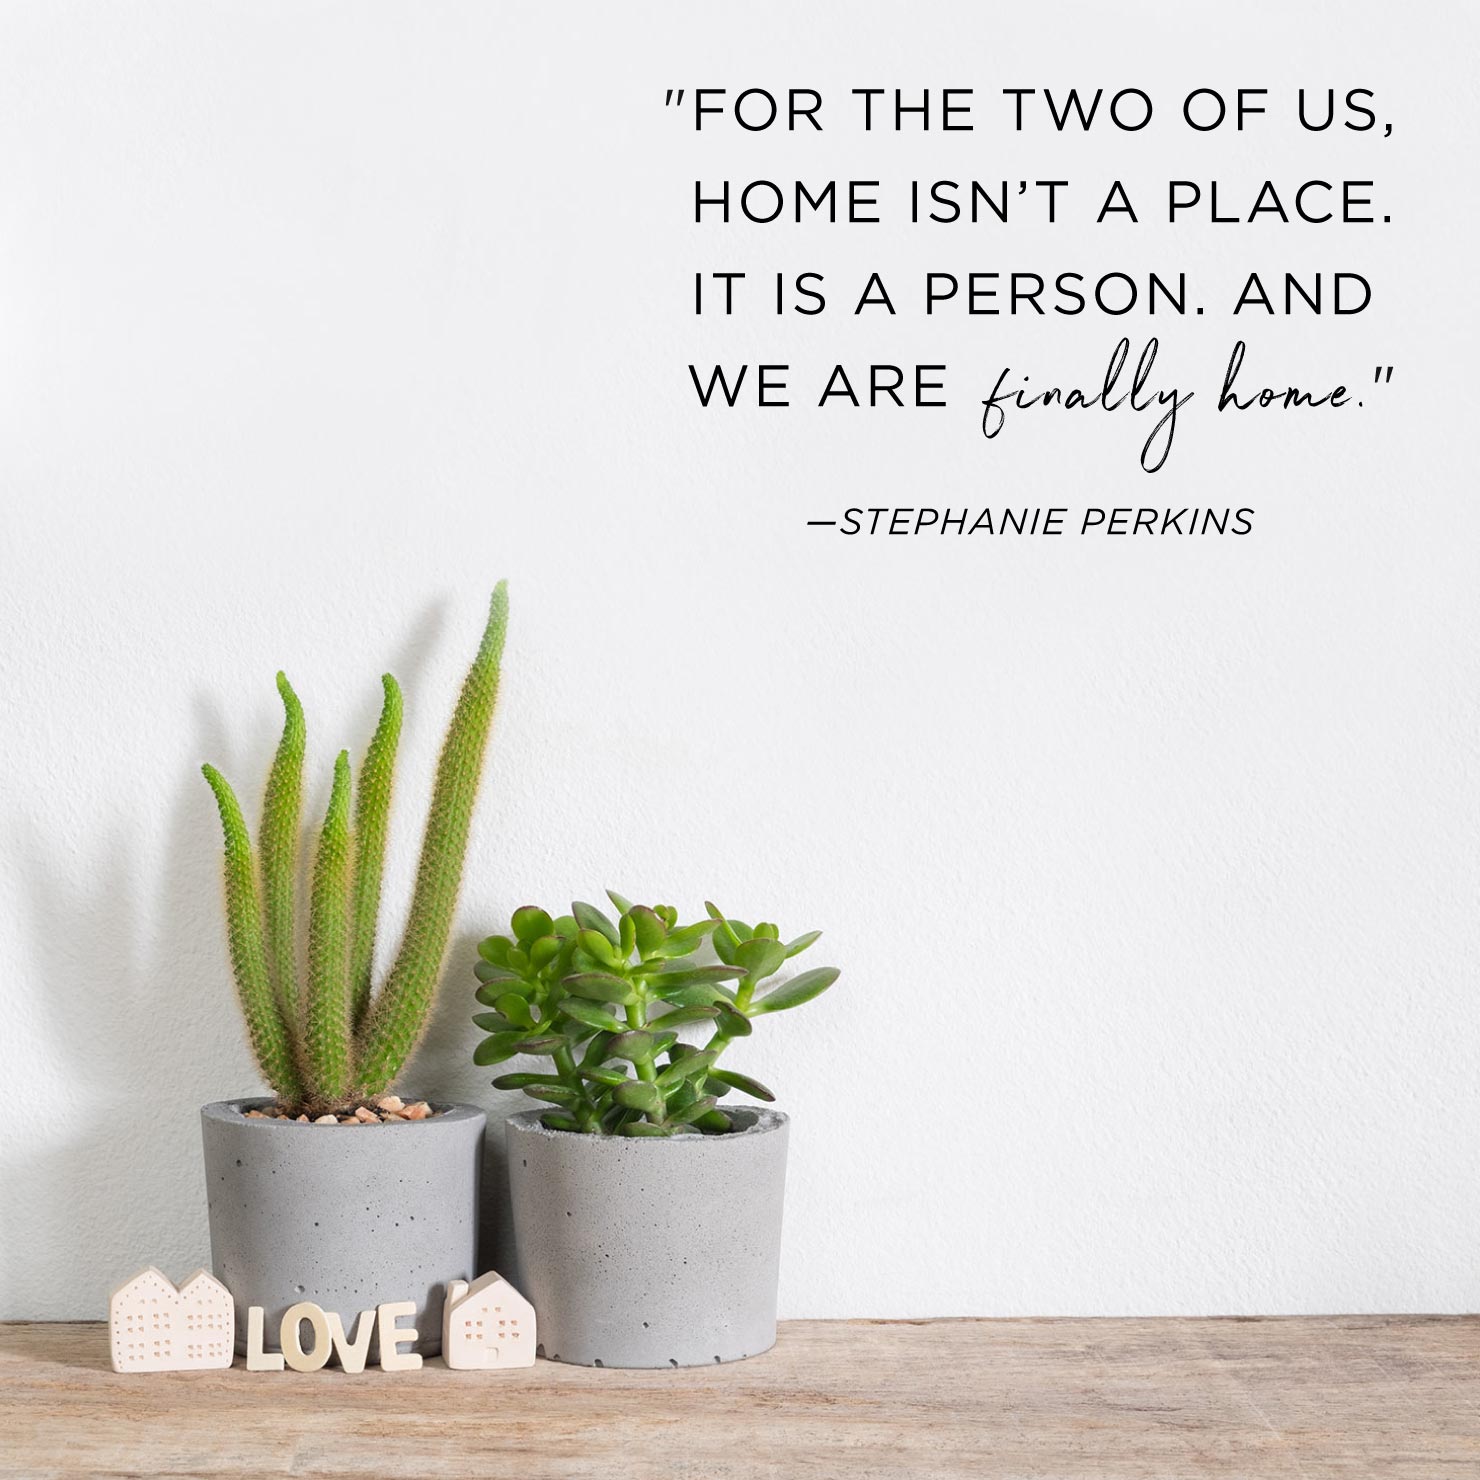 Quote above background image: For the two of us, home isn’t a place. It is a person. And we are finally home. - Stephanie Perkins